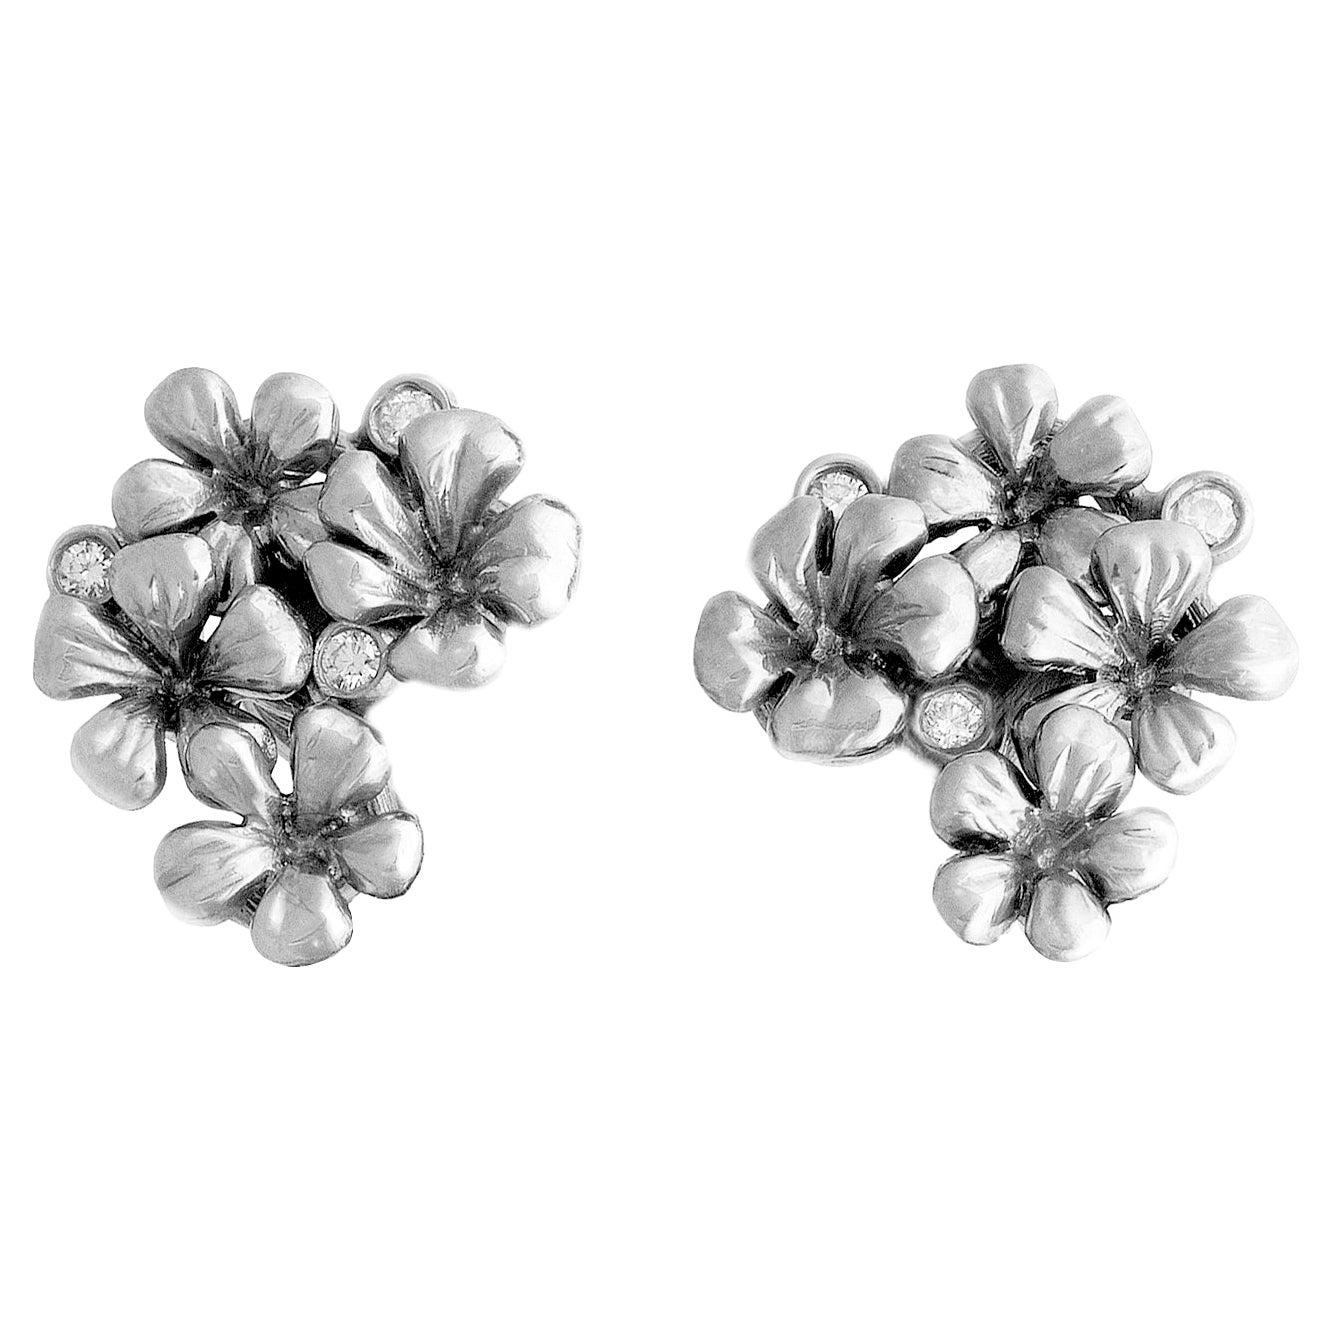 White Gold Earrings by the Artist with Diamonds Featured in Berlinale